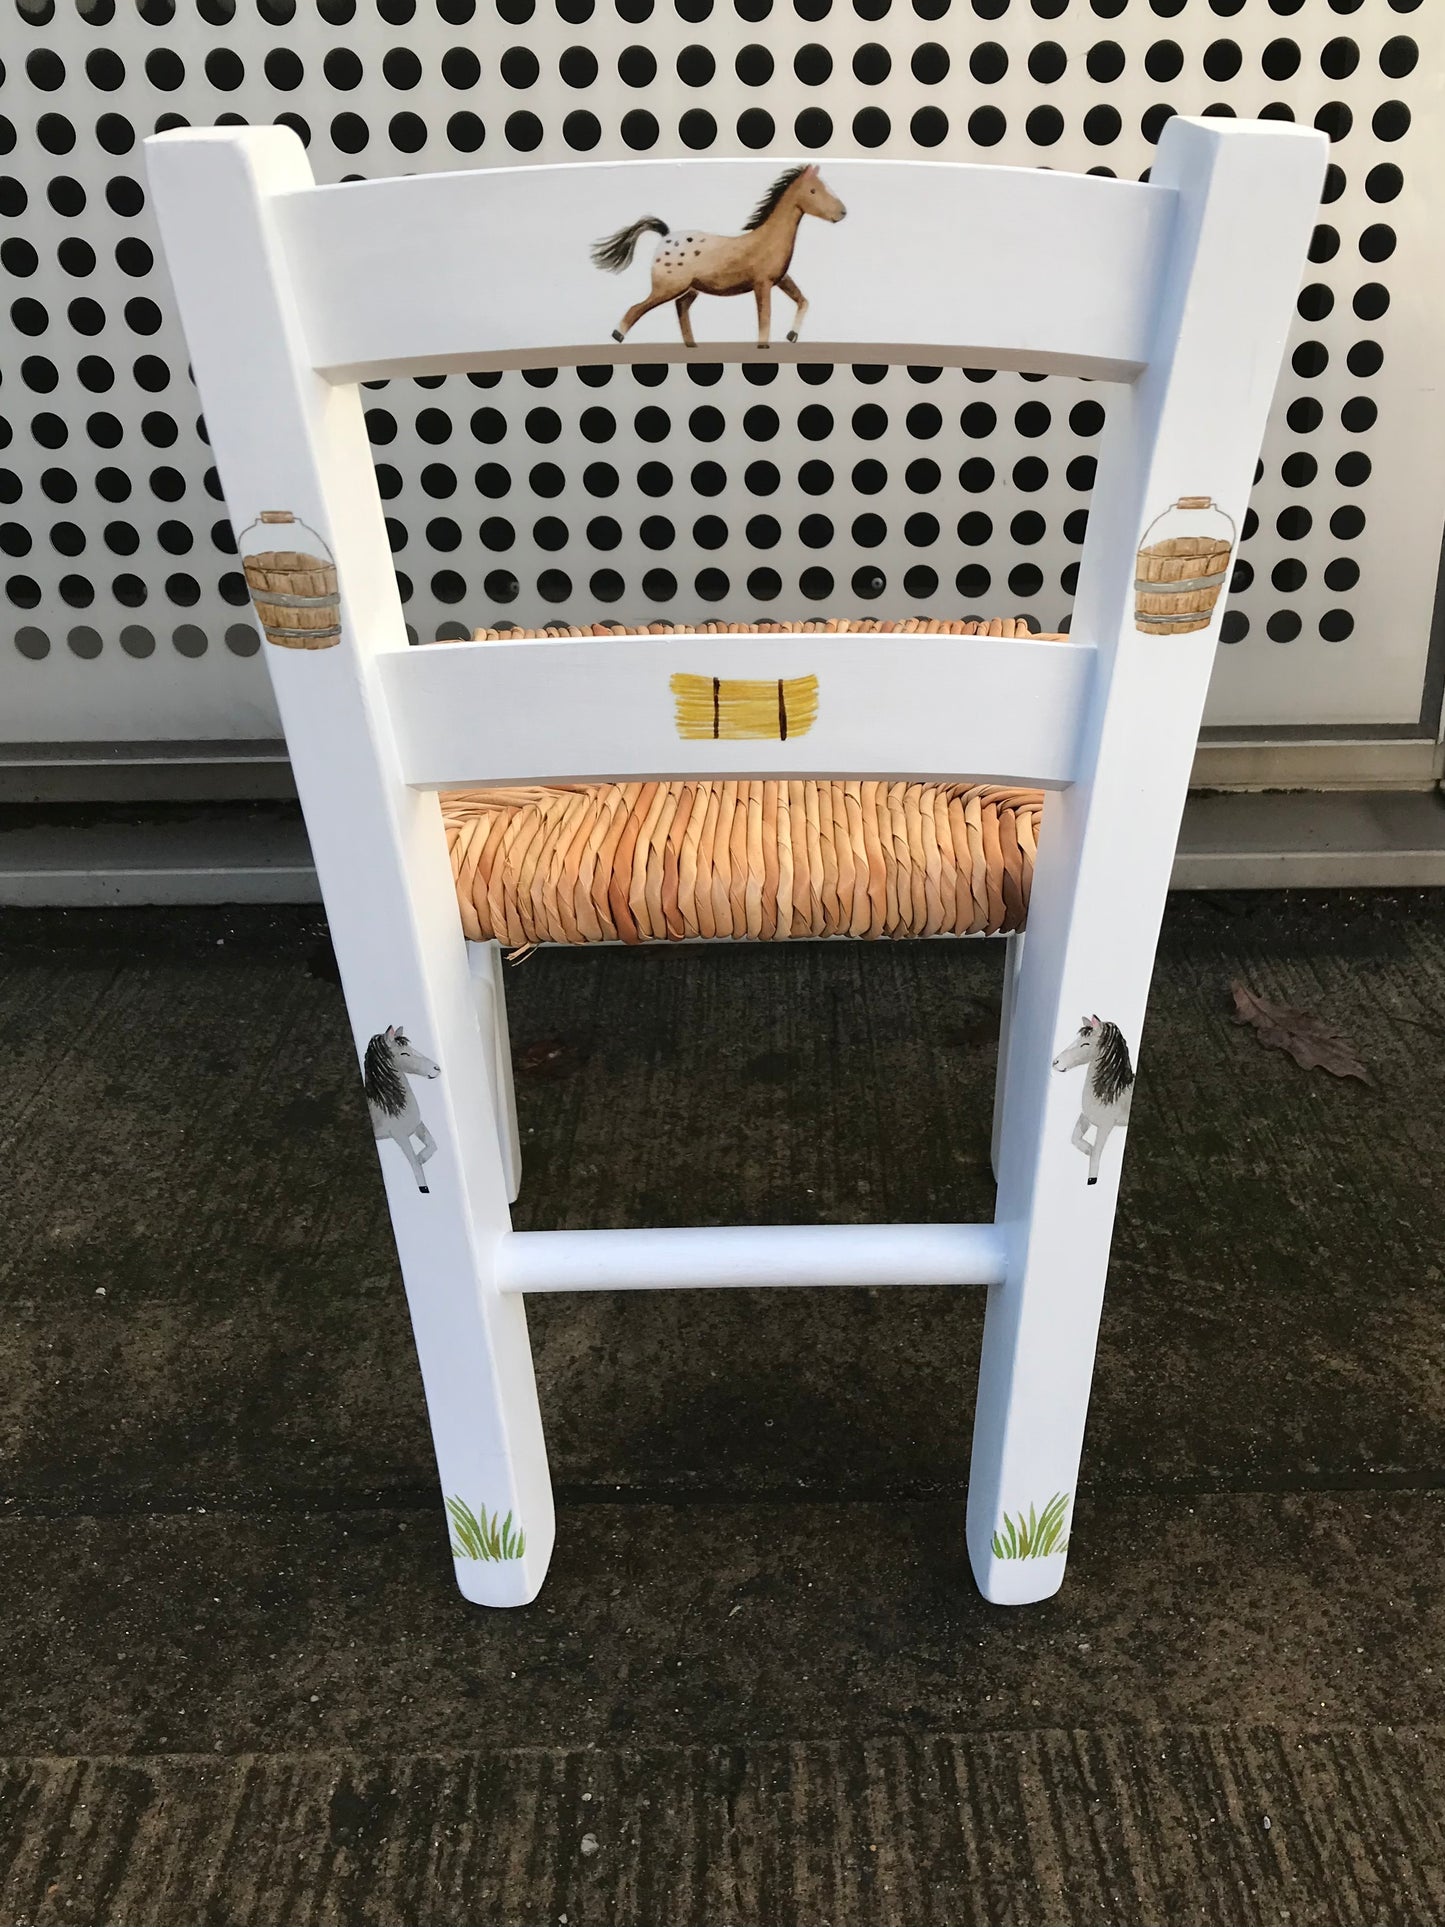 Rush seat personalised children's chair - My Pony theme - made to order